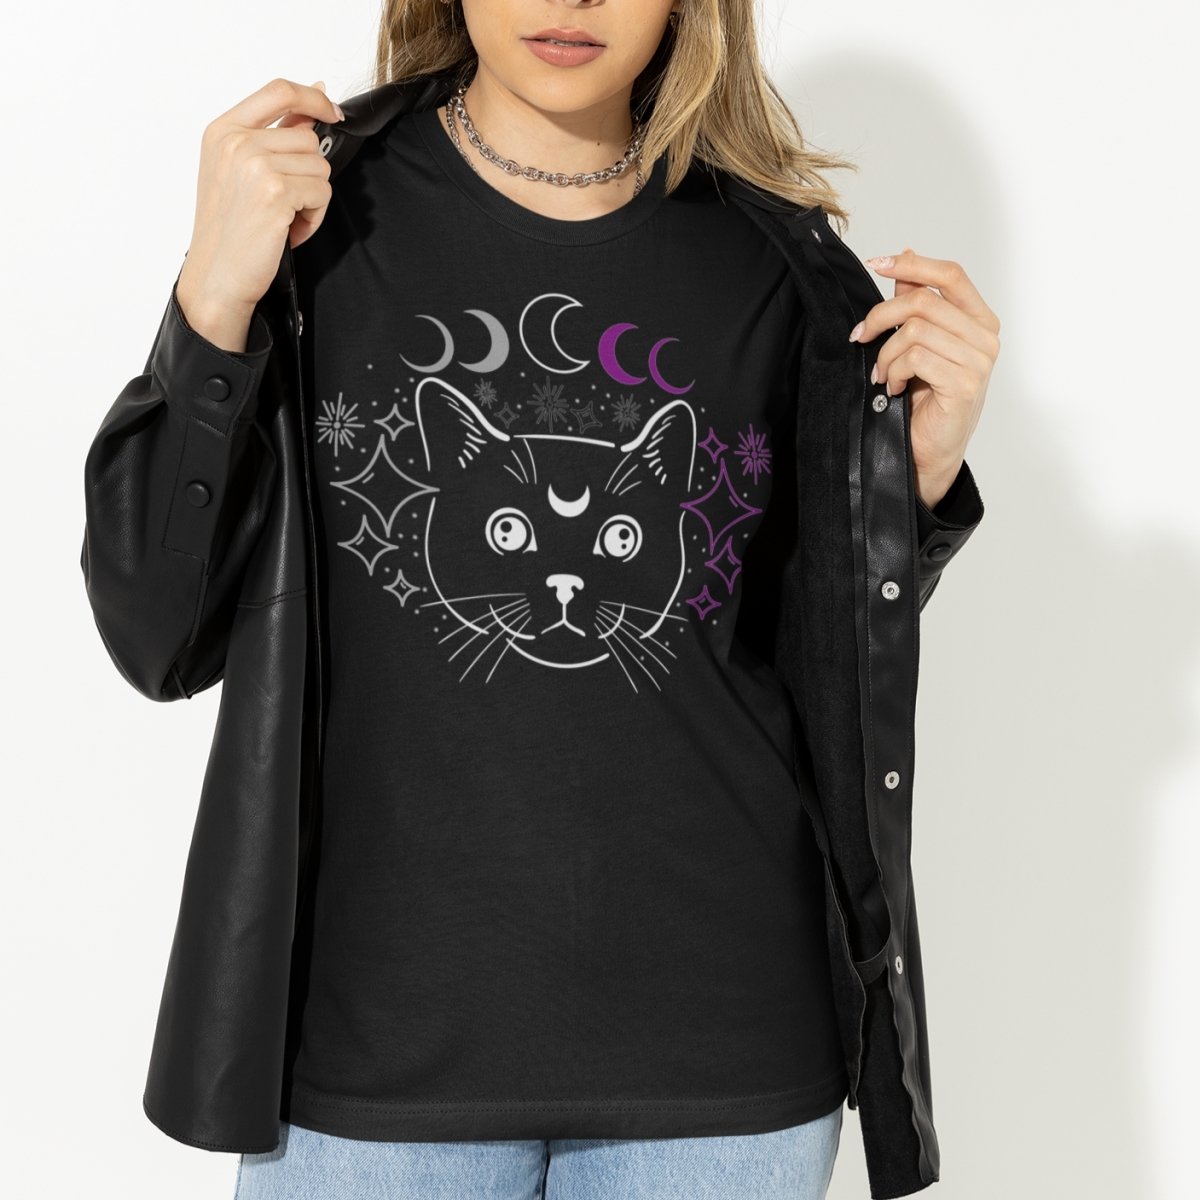 Asexual Celestial Cat Shirt - On Trend Shirts